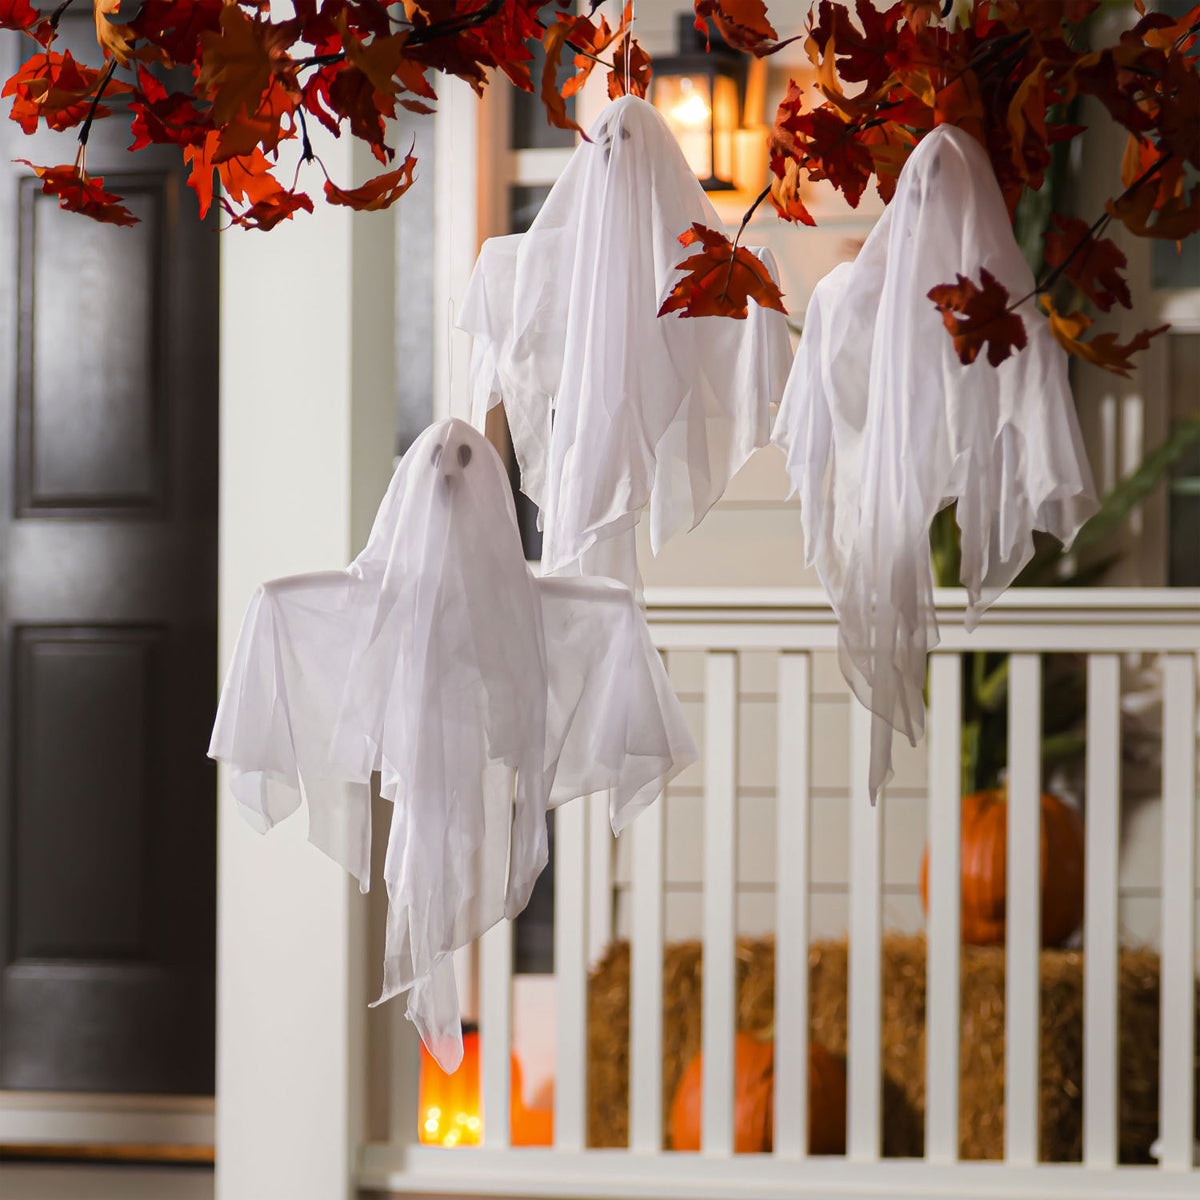 Hanging Ghosts